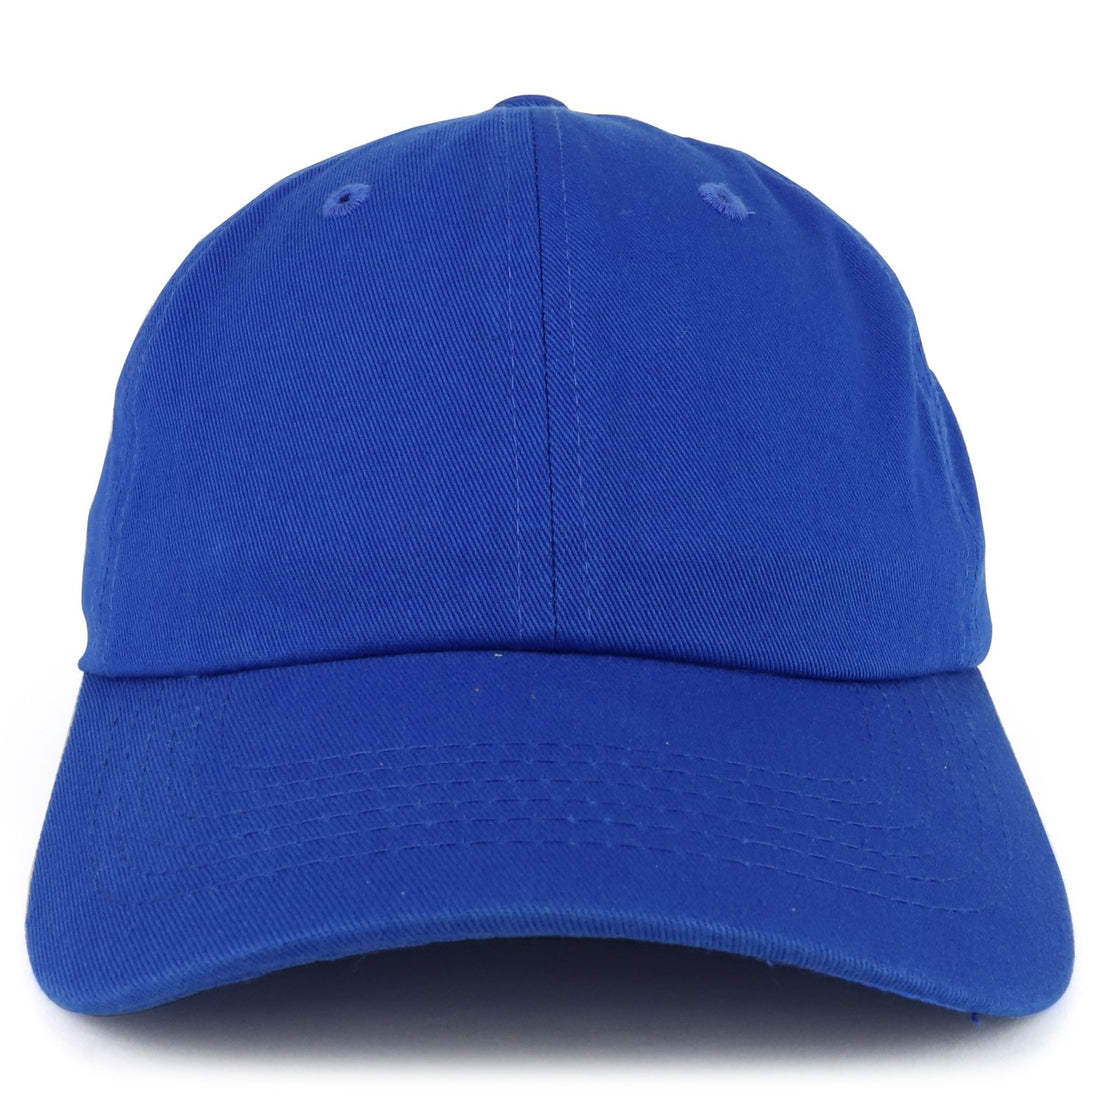 Trendy Apparel Shop Plain Unstructured Relaxed Style Dad Hat